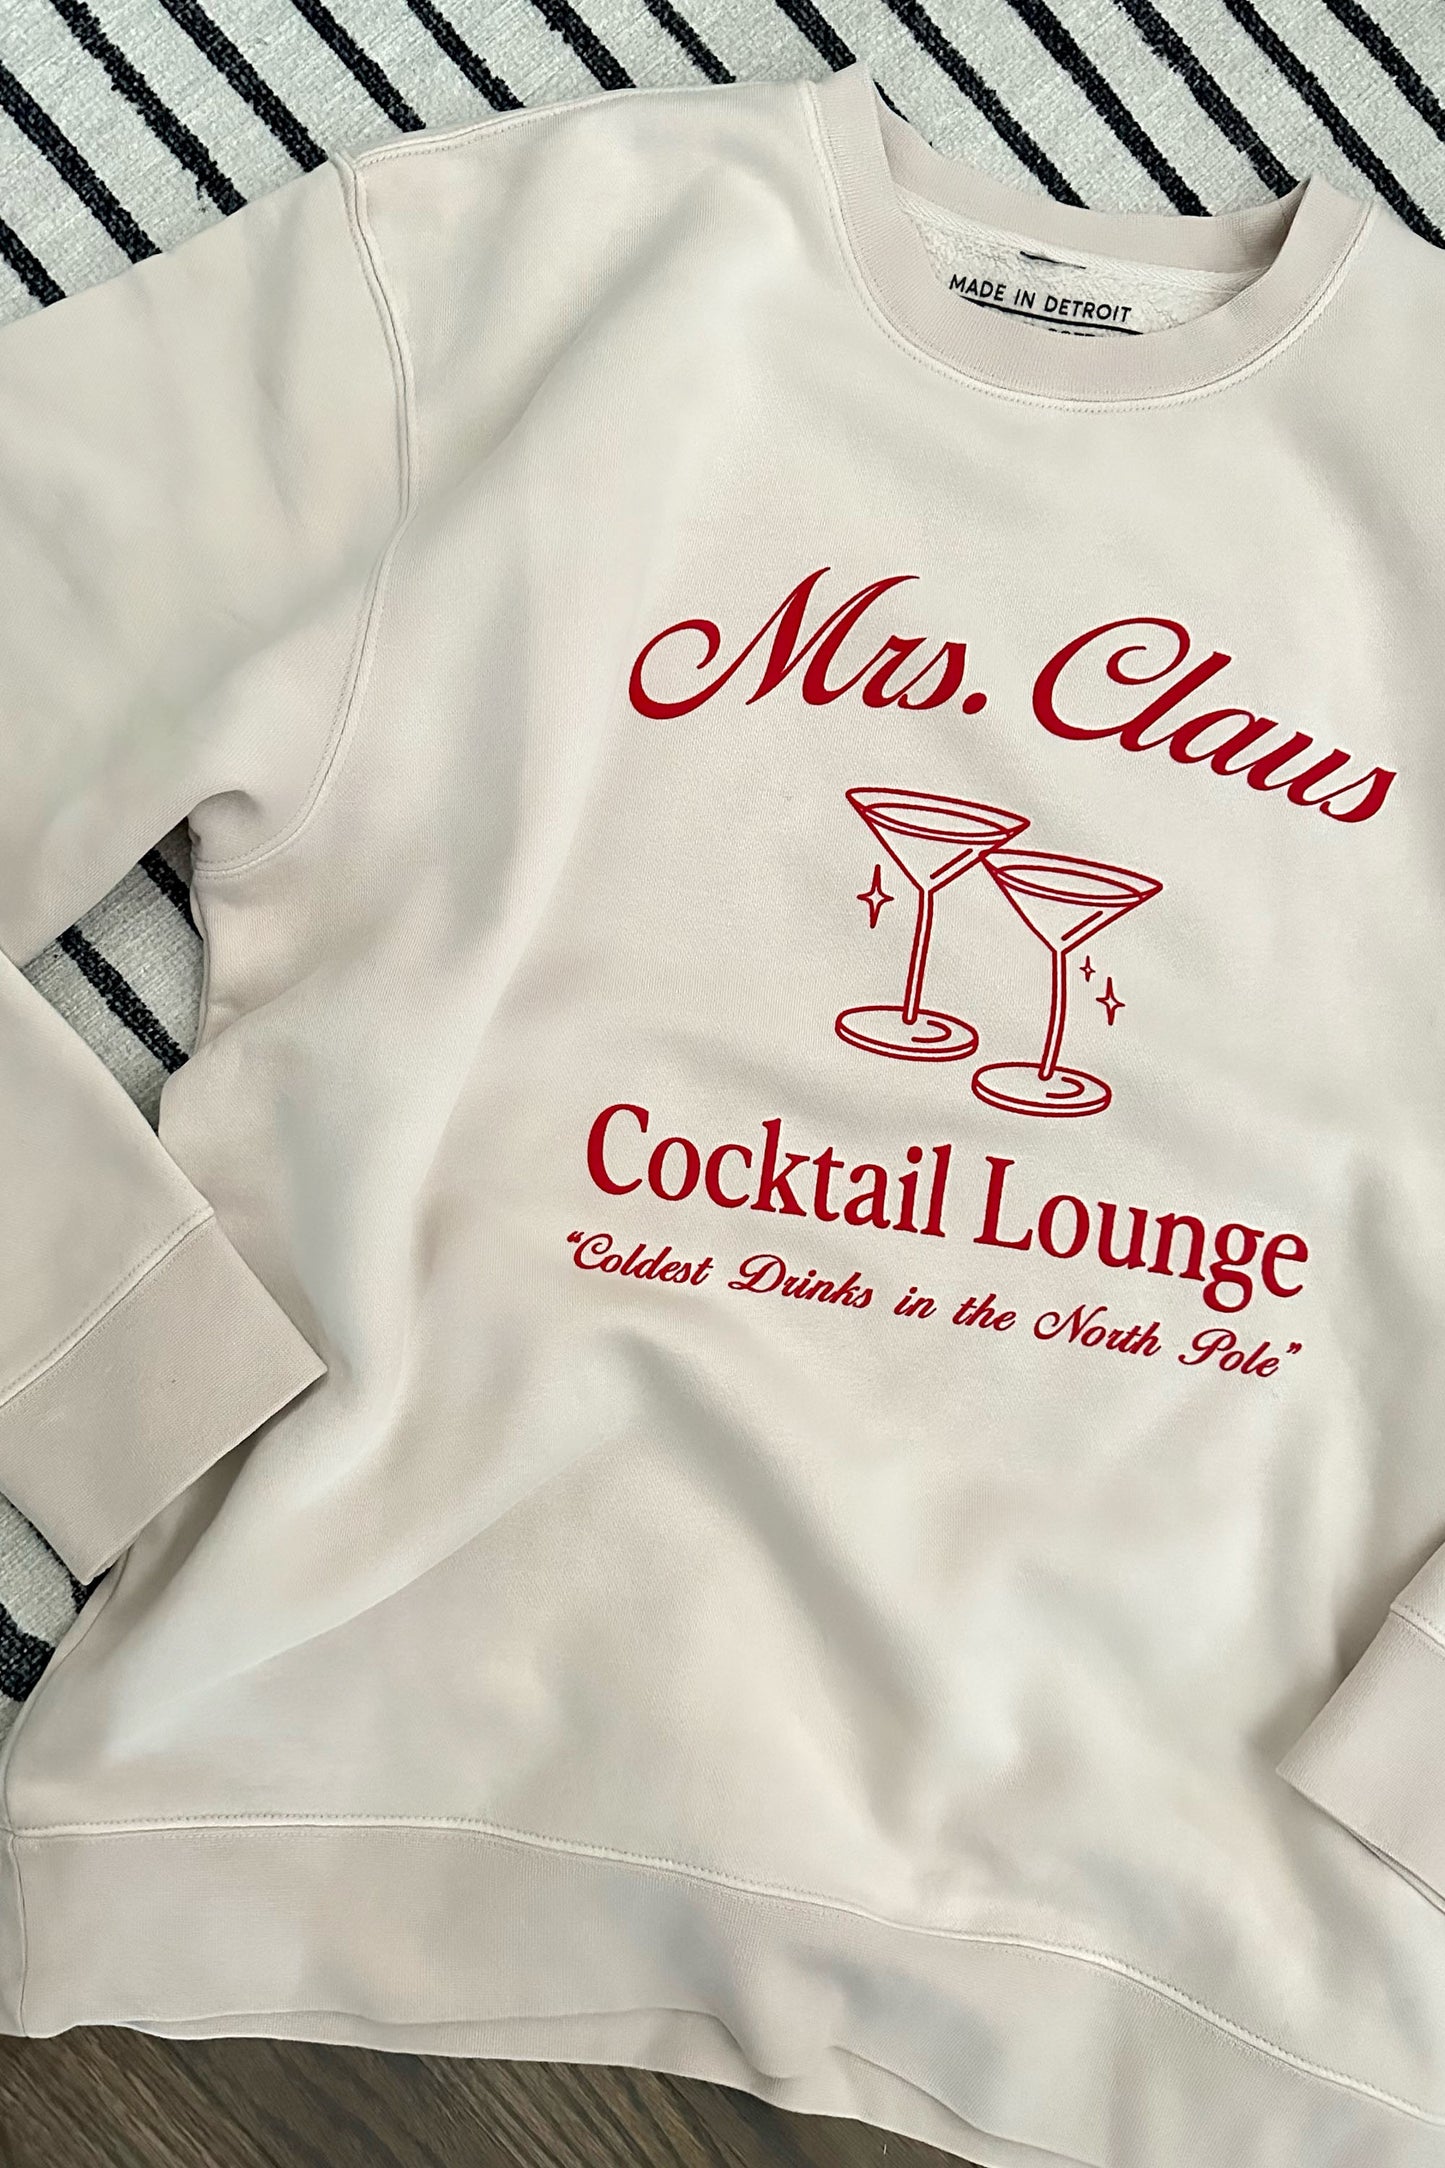 Mrs. Claus Cocktail Lounge